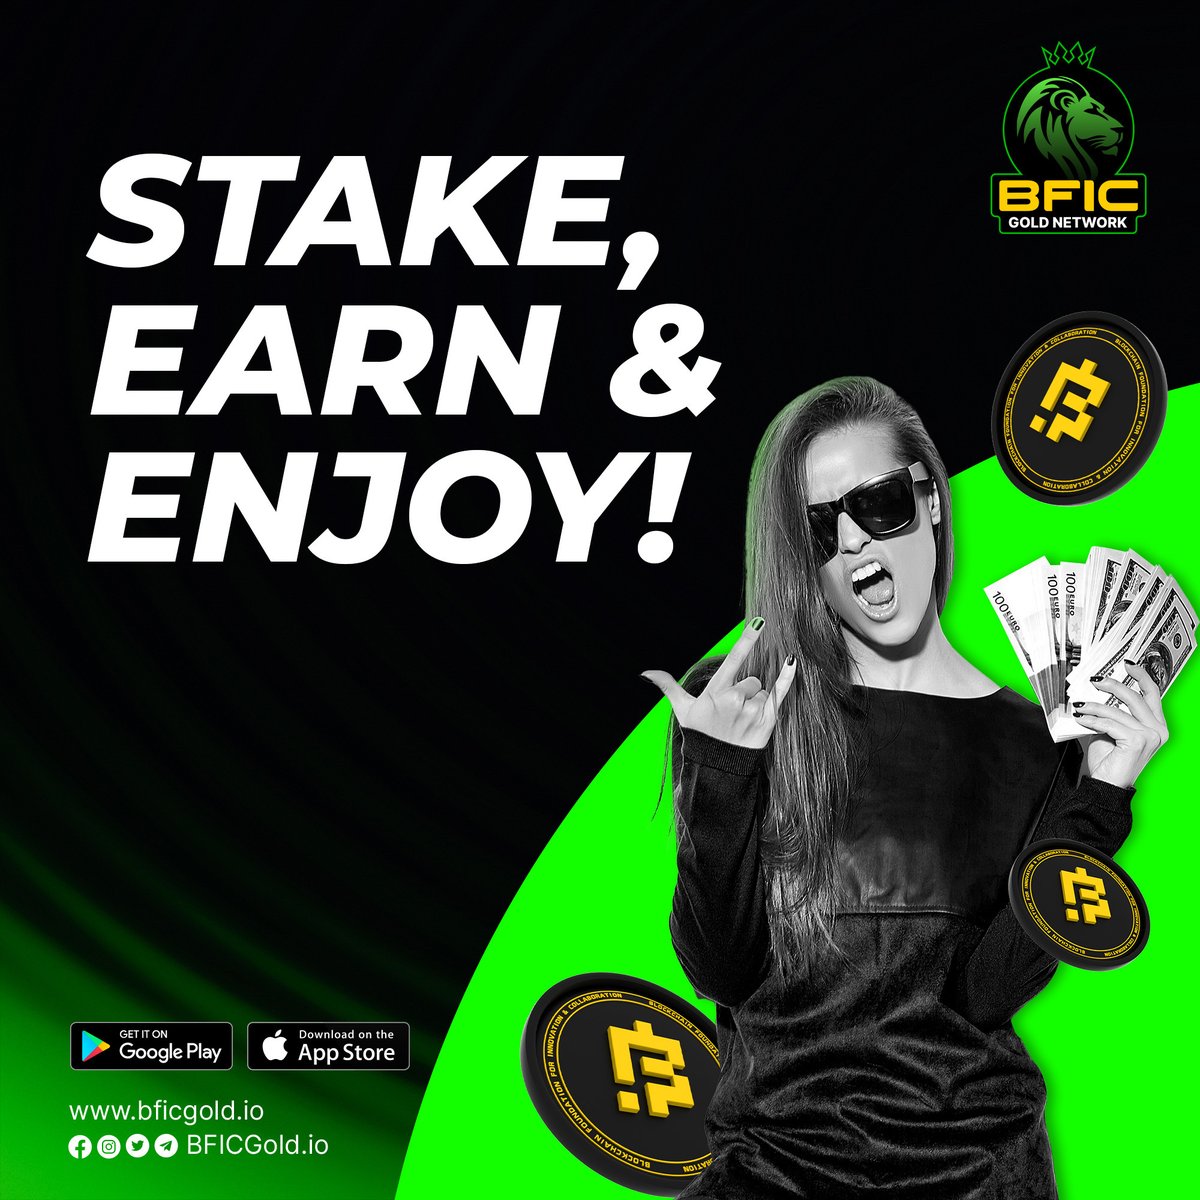 ⛏️ Stake, Earn, and Enjoy the rewards on the BFIC Gold Network! 💰 Unlock a world of opportunity with our cutting-edge platform. Stake your BFIC and watch your earnings soar! 🚀
Join us and experience the future of digital finance.
.
.
.
#BFICGoldNetwork #CryptoInvesting…